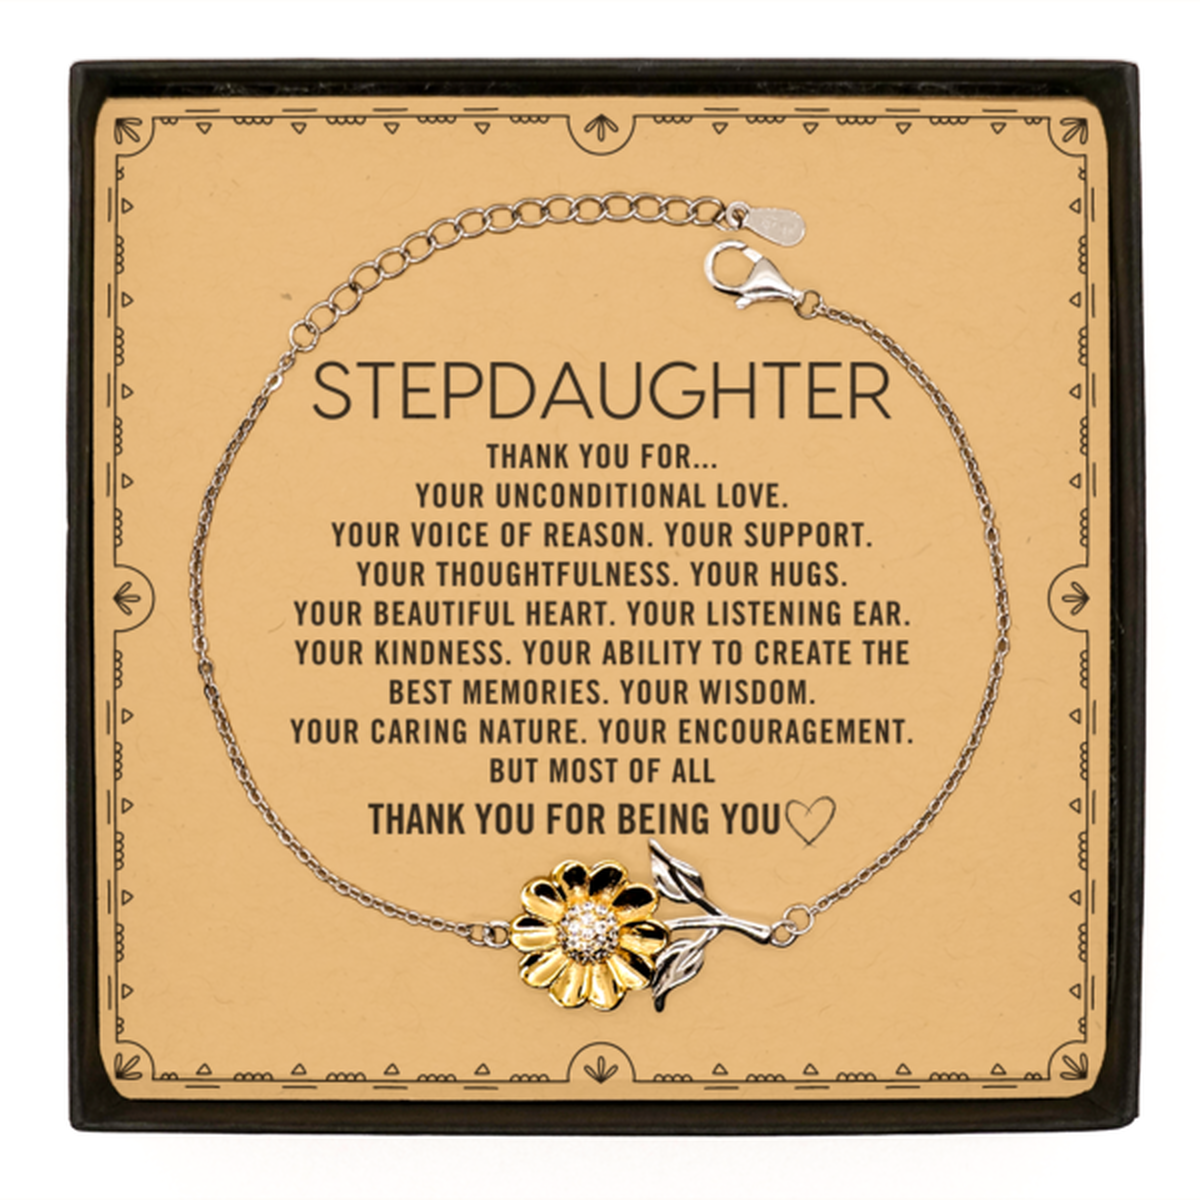 Stepdaughter Sunflower Bracelet Custom, Message Card Gifts For Stepdaughter Christmas Graduation Birthday Gifts for Men Women Stepdaughter Thank you for Your unconditional love